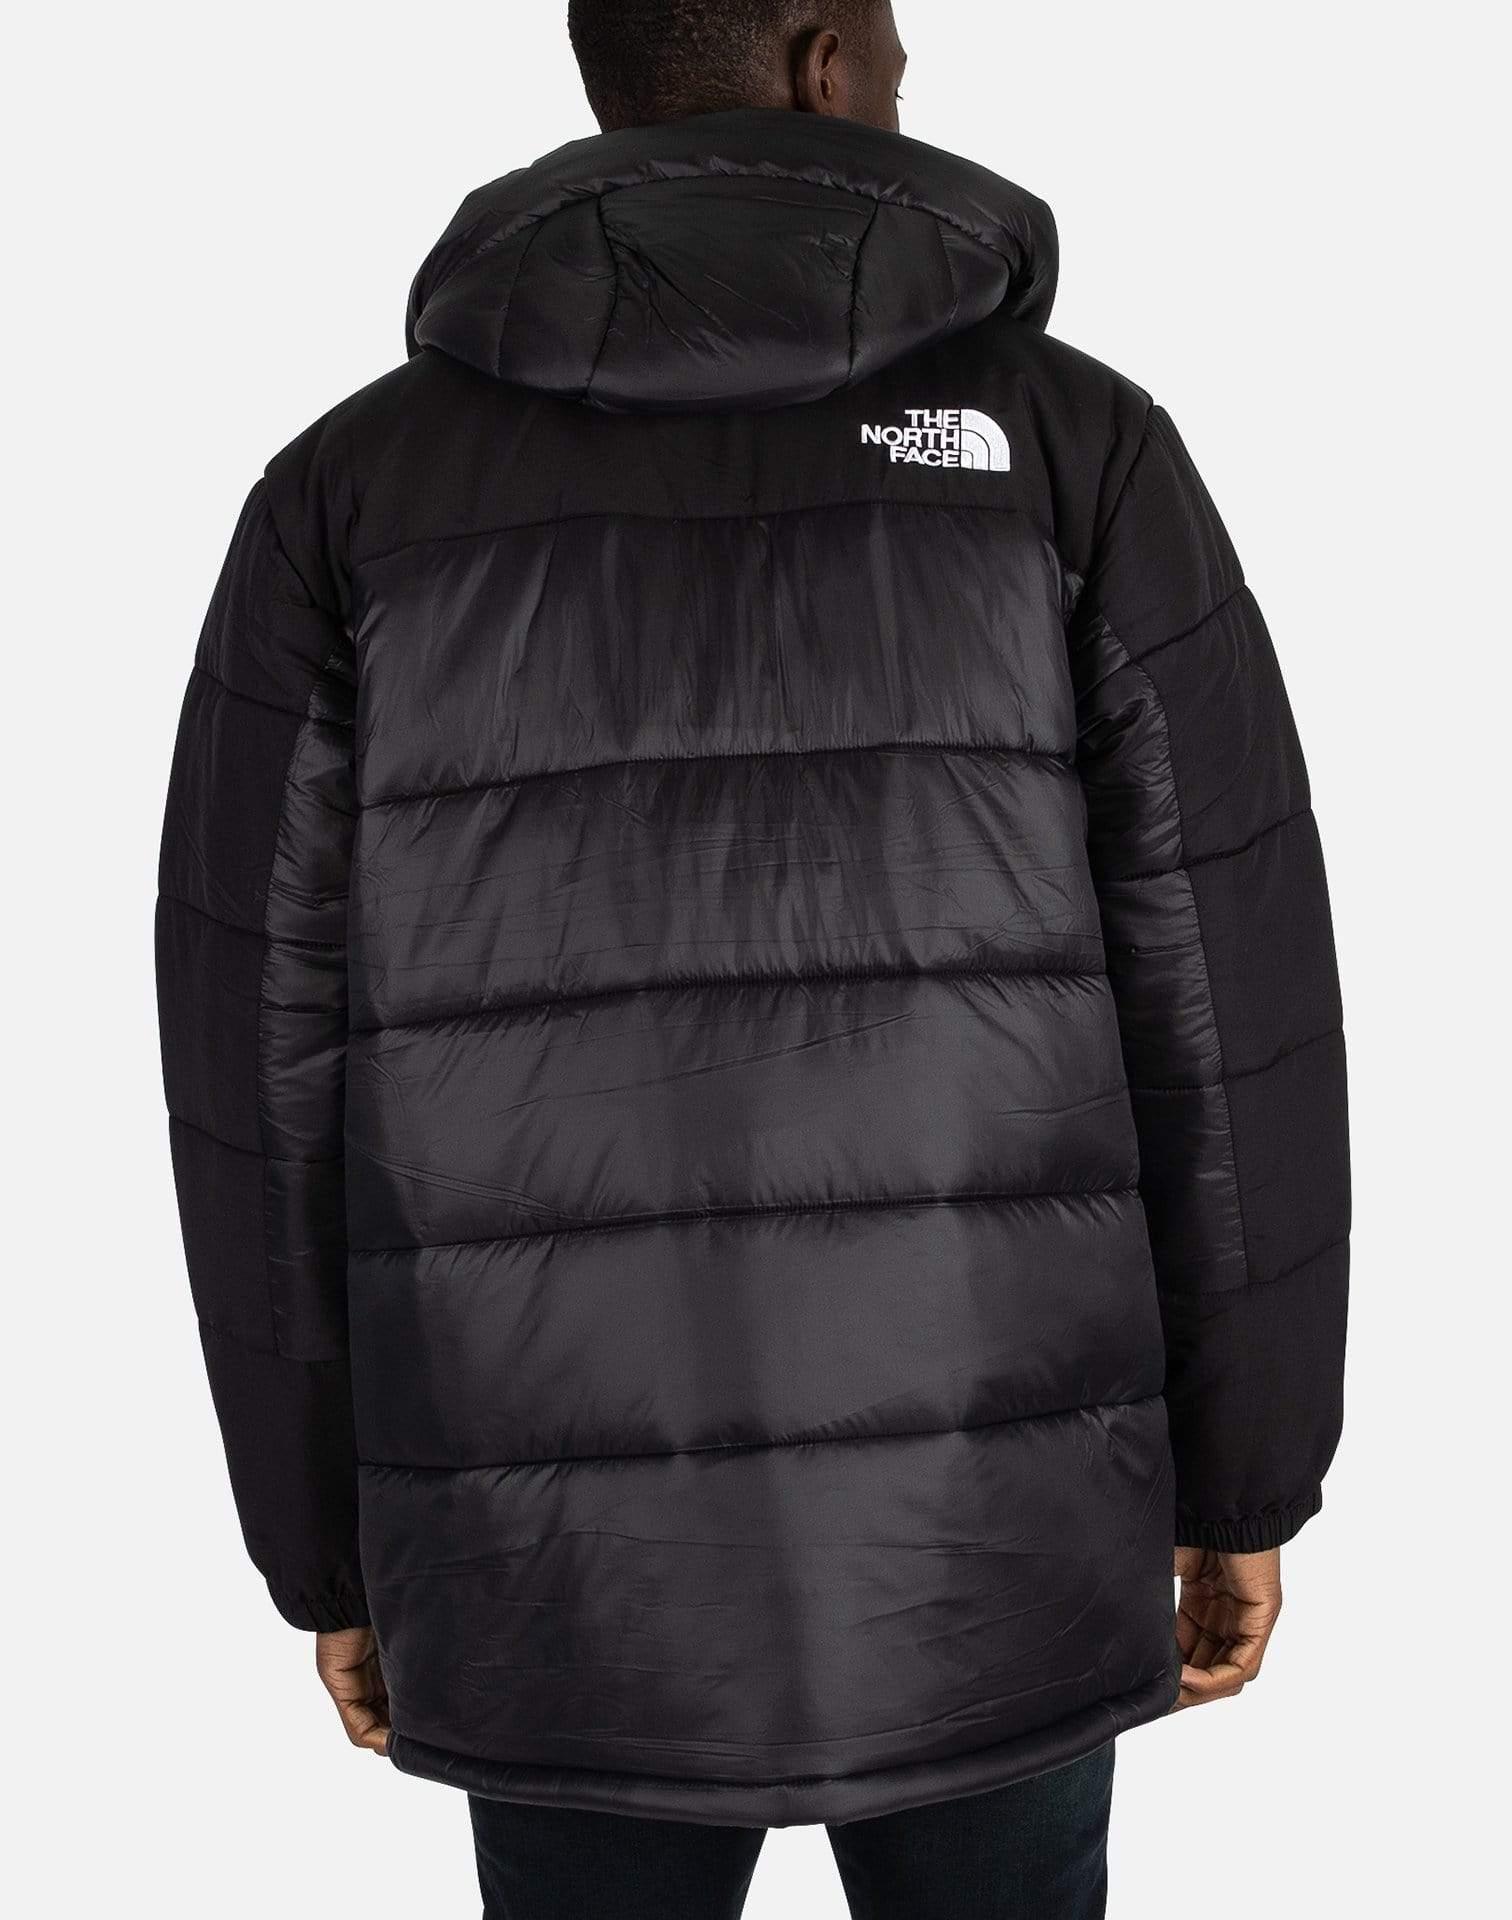 The North Face Hmlyn Insulated Parka in Black for Men - Lyst